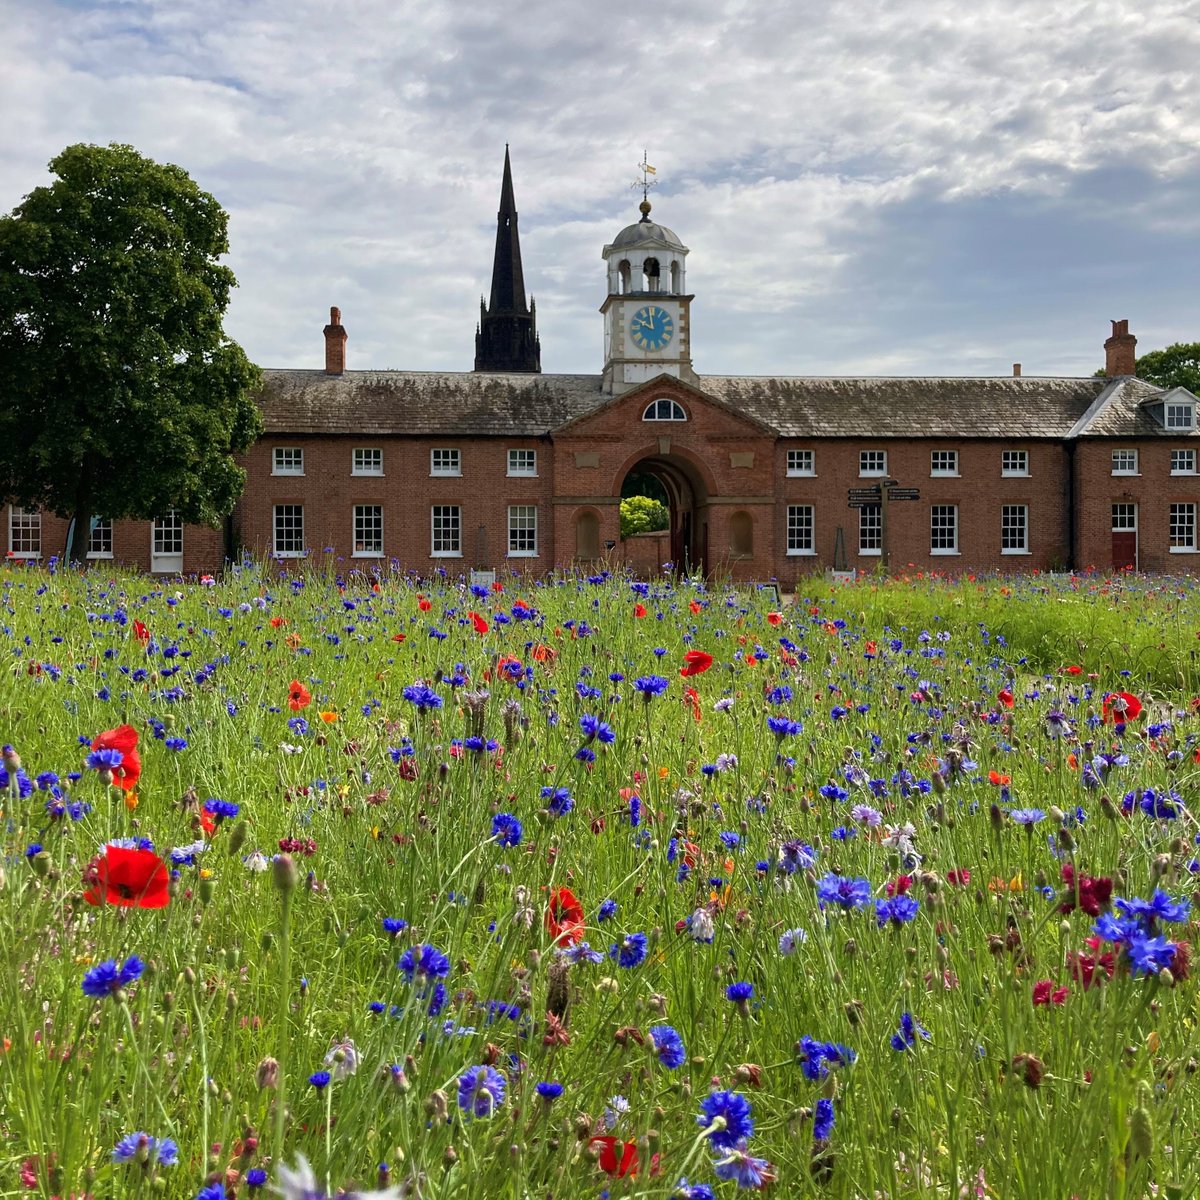 The Gardens team have been busy sowing this years wildflower meadow in the Turning Yard today. It'll provide a vital habitat for a huge array of wildlife and pollinators, and an eye-catching display of colour through to autumn. We expect it to flower mid-June #ClumberPark